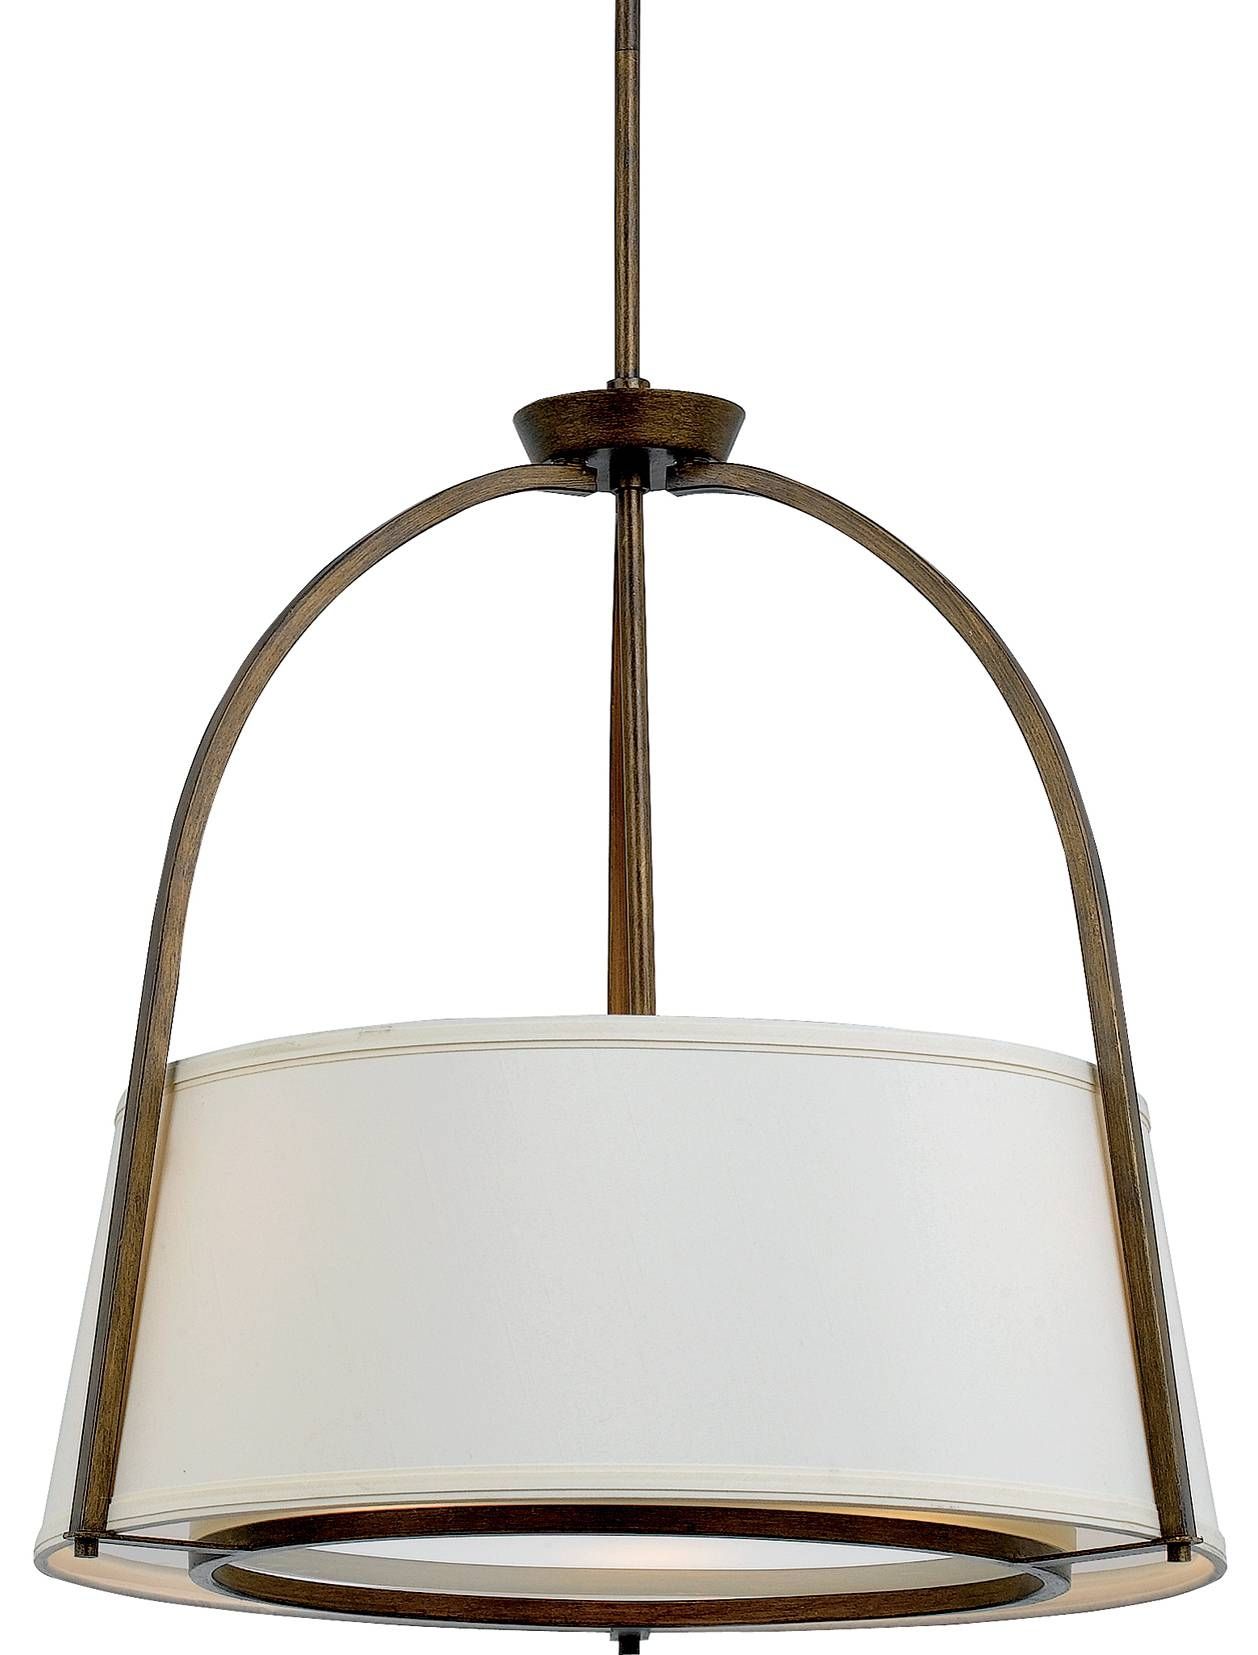 Home Decor + Home Lighting Blog » Blog Archive » Quoizel Lighting Throughout Quoizel Pendant Lights Fixtures (View 5 of 15)